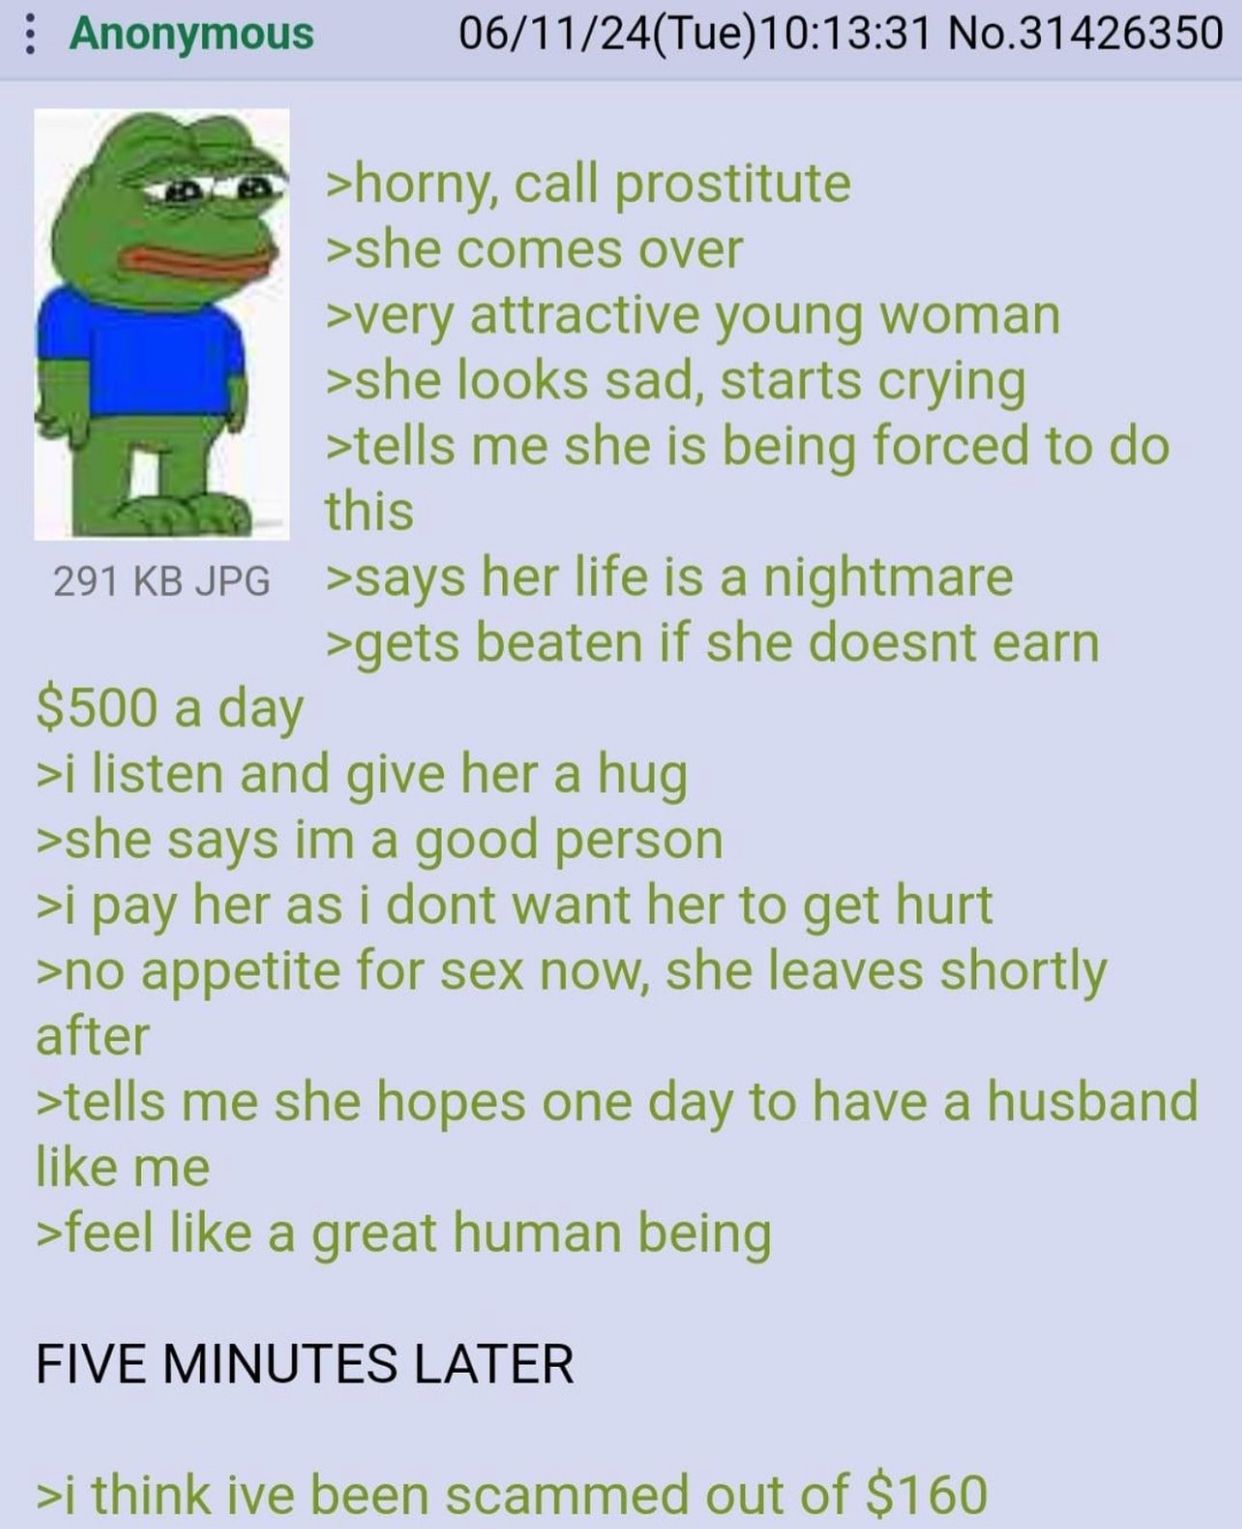 anon is a good guy